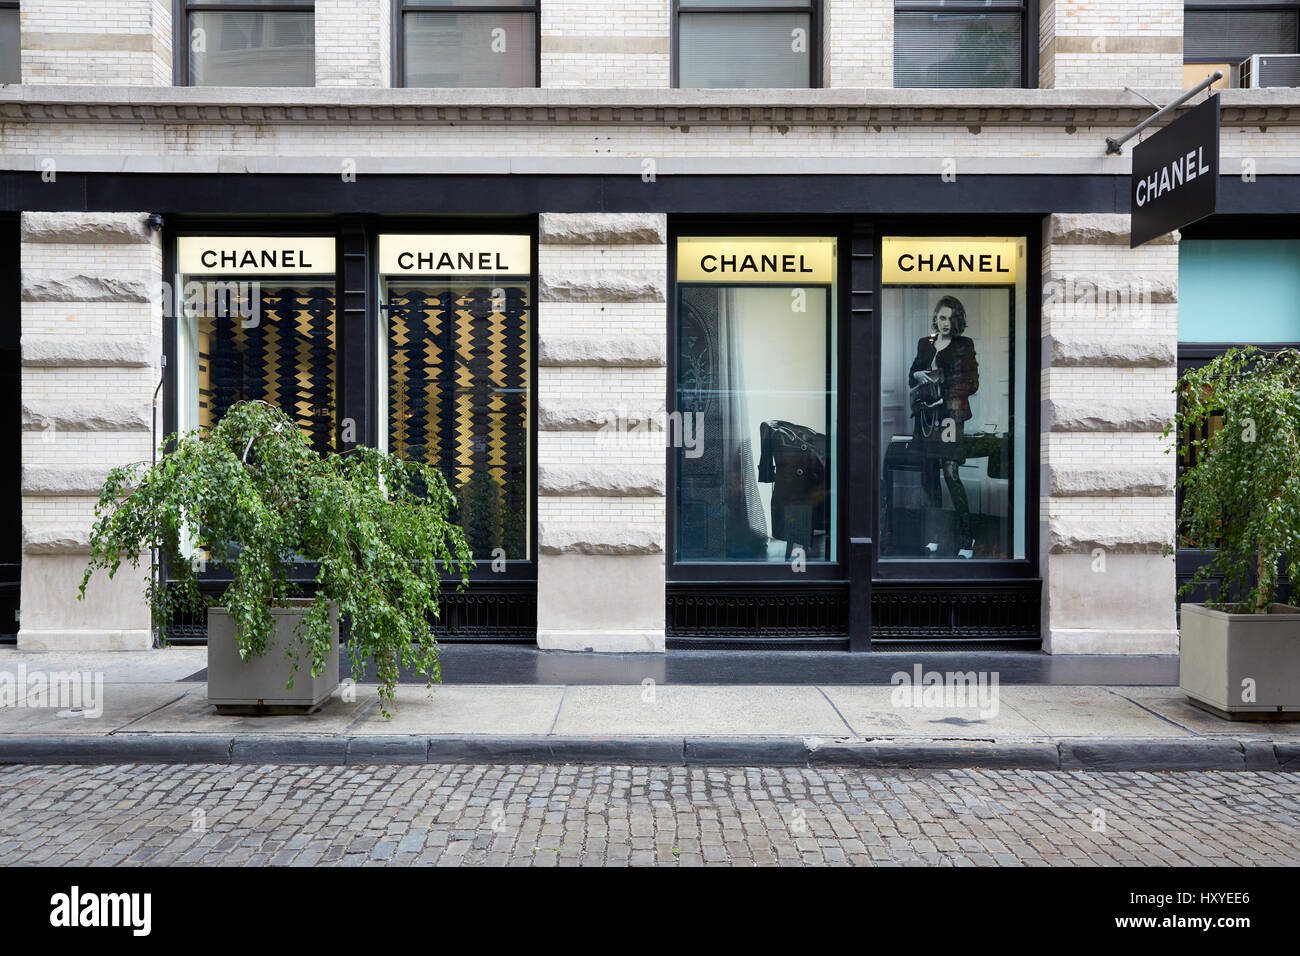 Chanel Boutique Window High Resolution Stock Photography and Images - Alamy